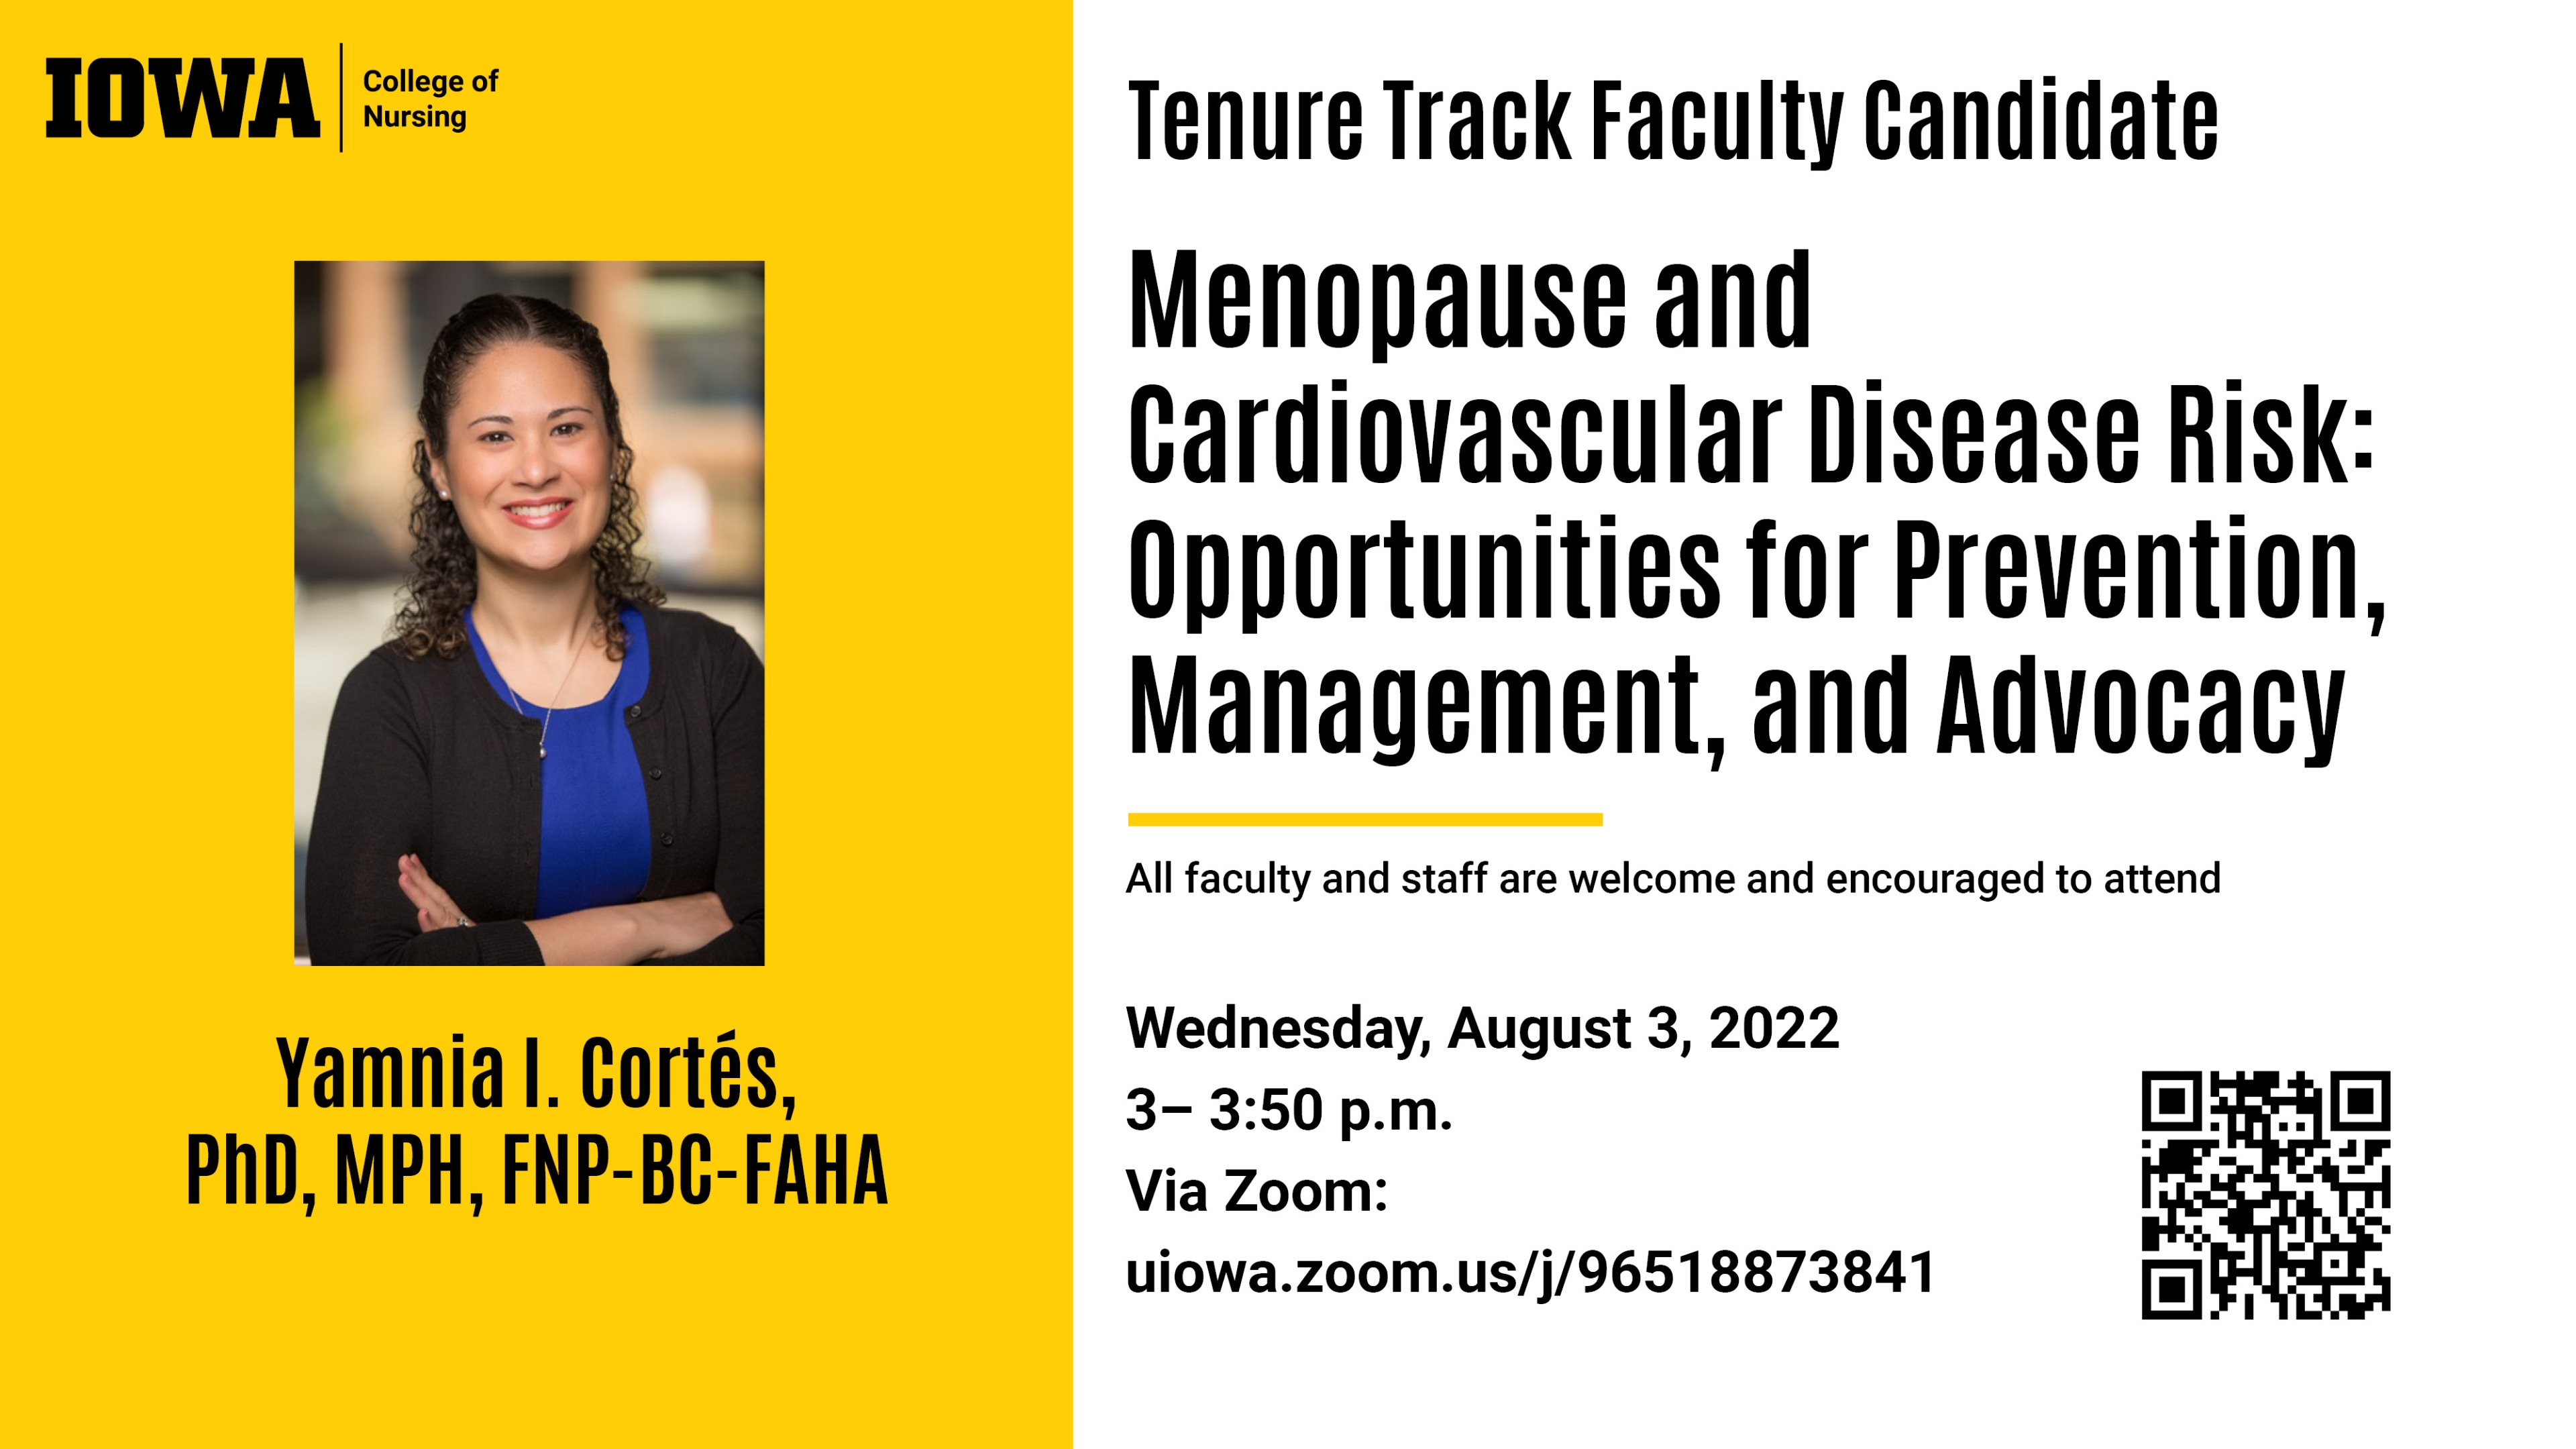 presentation by Y. Cortes, Prospective Tenure Track Faculty Candidate, August 3, 3 p.m. via zoom